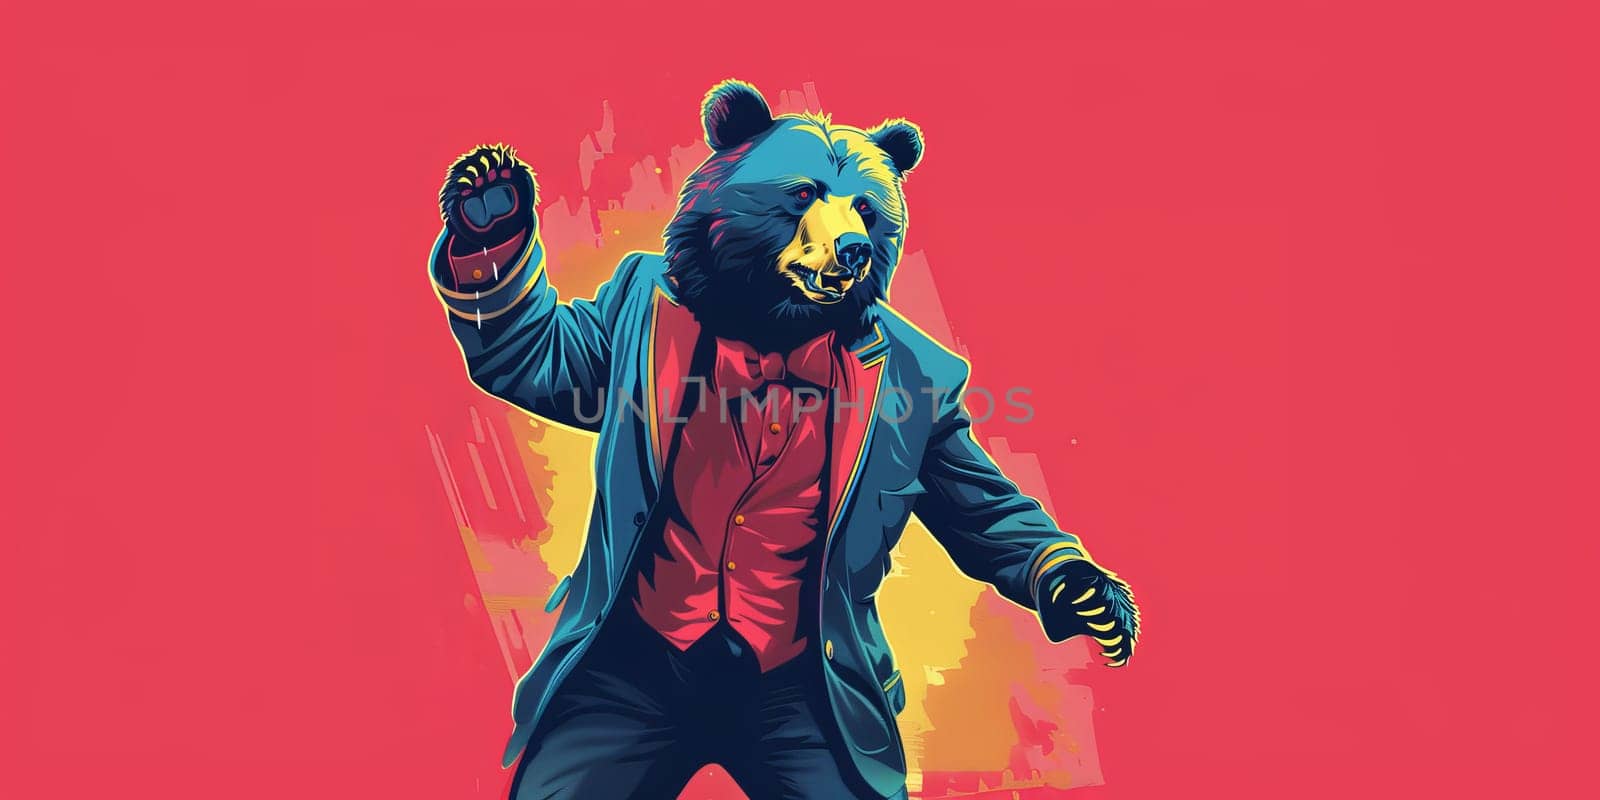 Dancing circus bear isolated on a colorful background